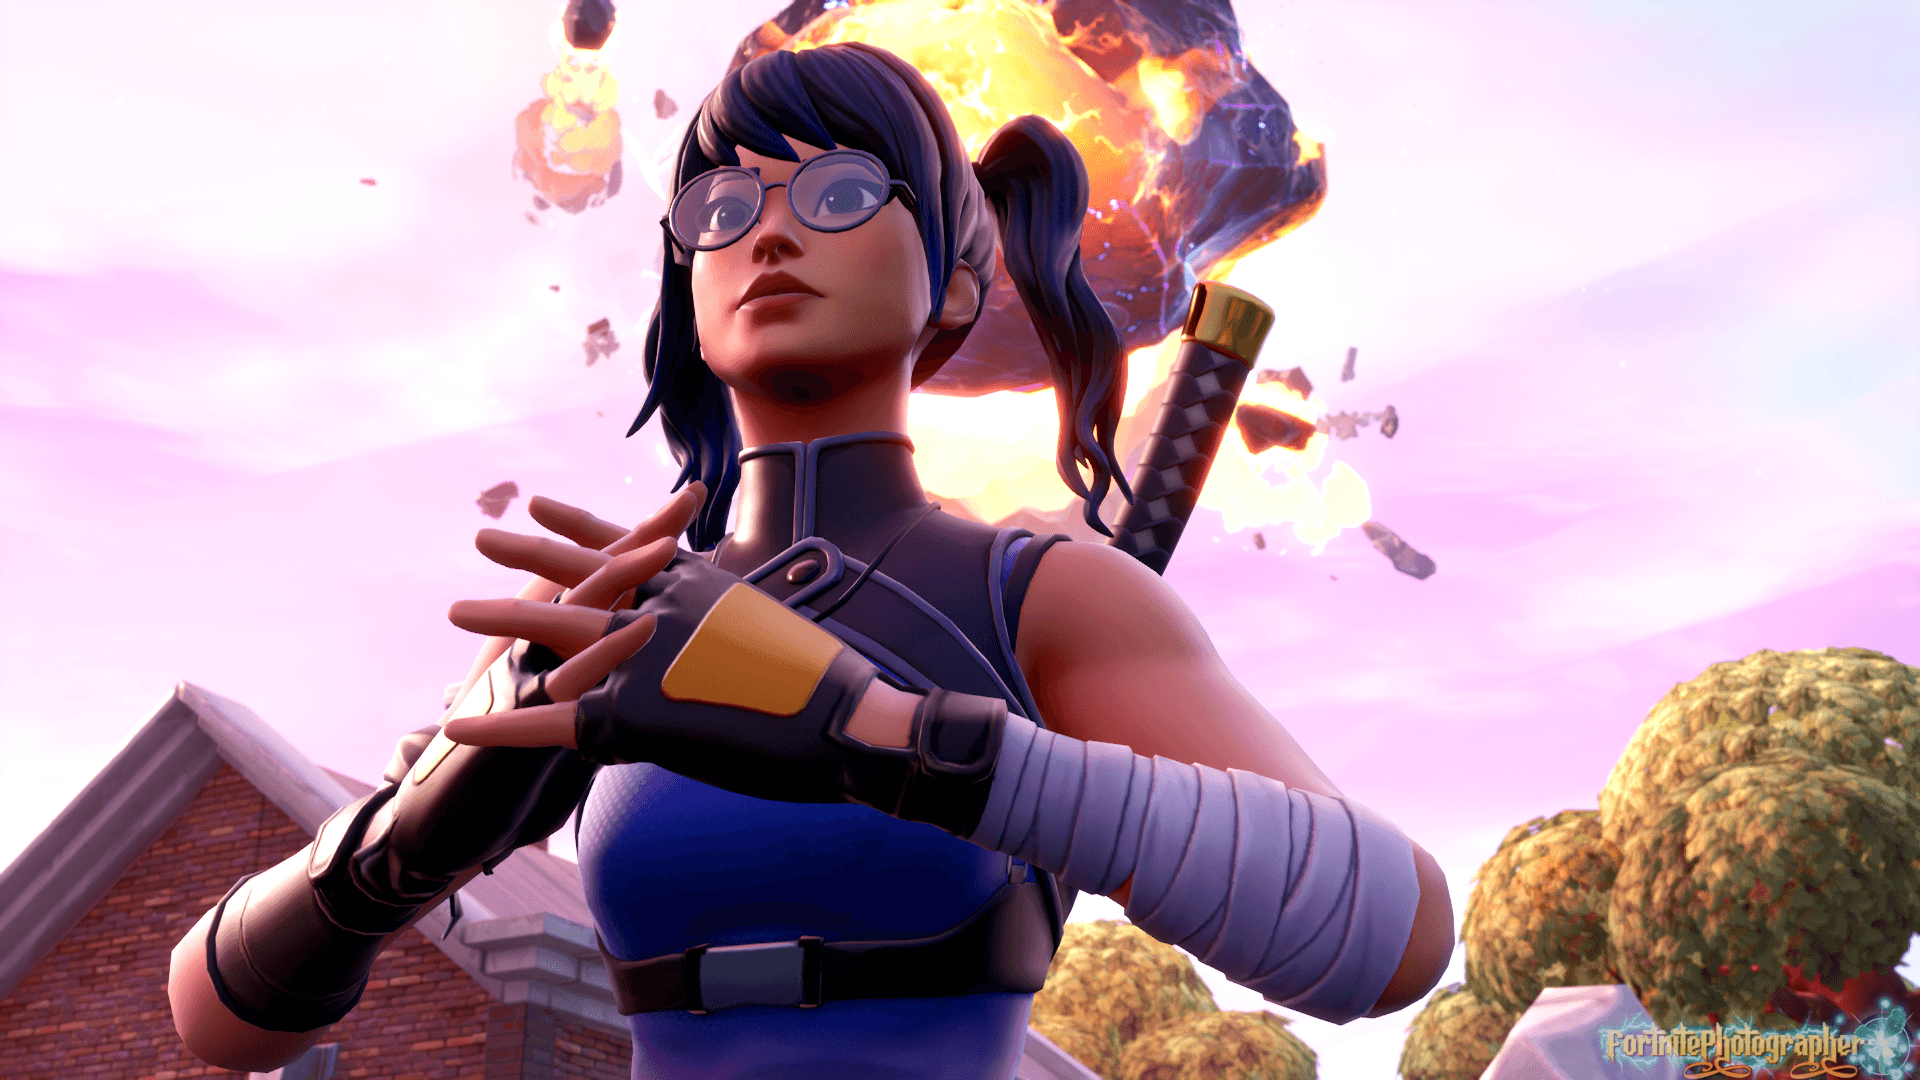 43 HQ Photos Fortnite Profile Pic Crystal / Thicc Crystal Skin Fortnite